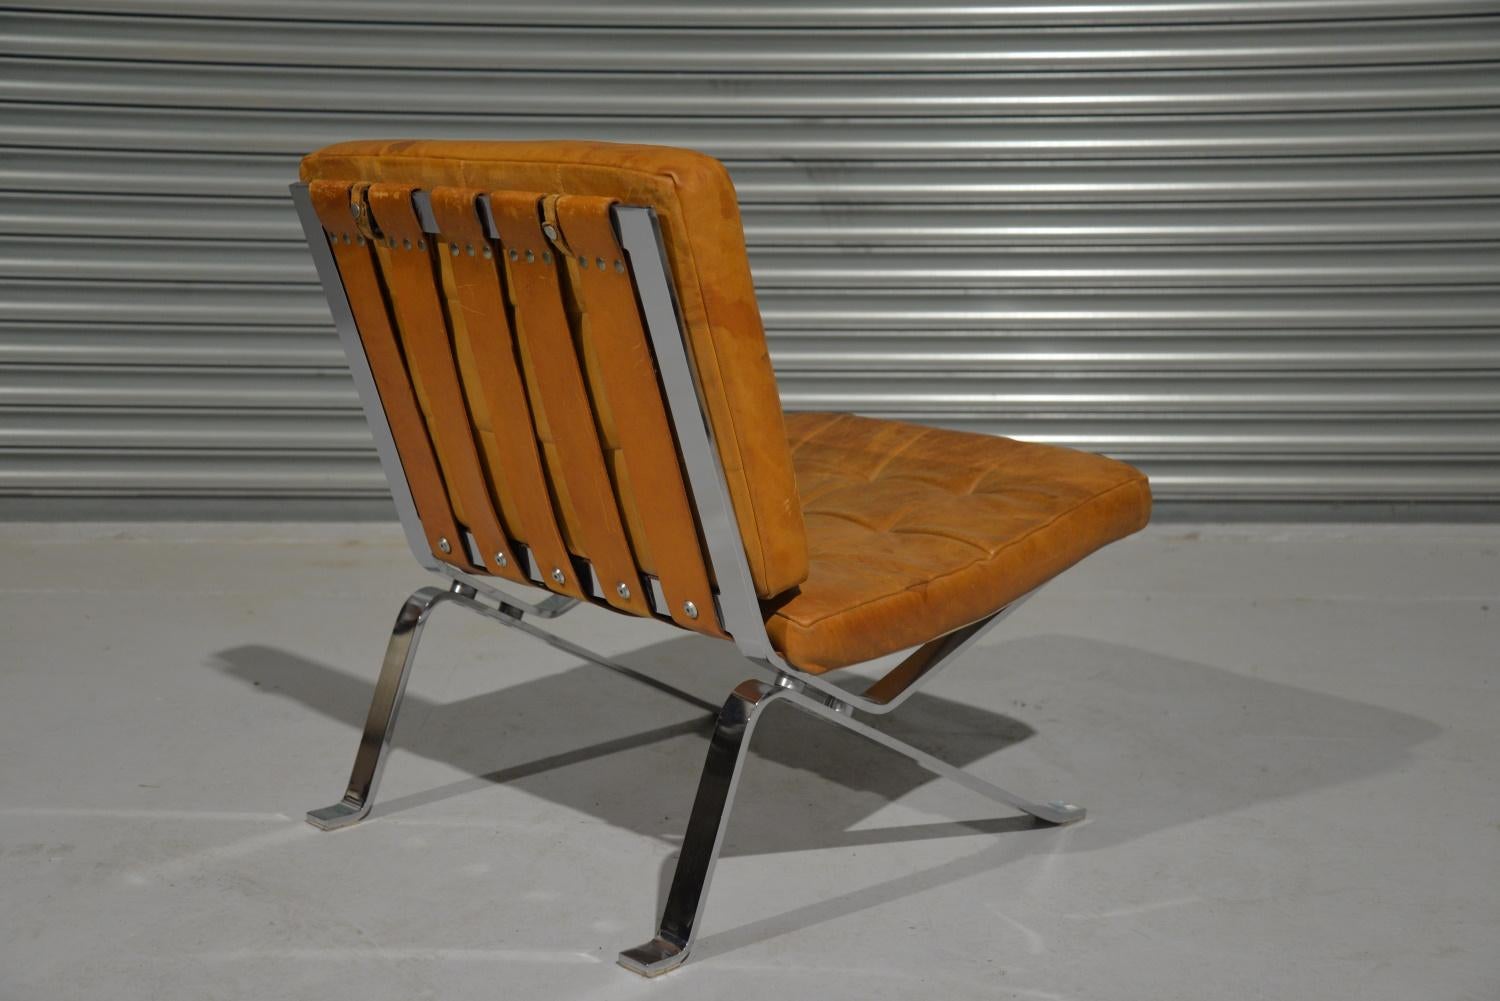 Leather Vintage Rh-301 Lounge Chair by Robert Haussmann for De Sede, Switzerland, 1954 For Sale